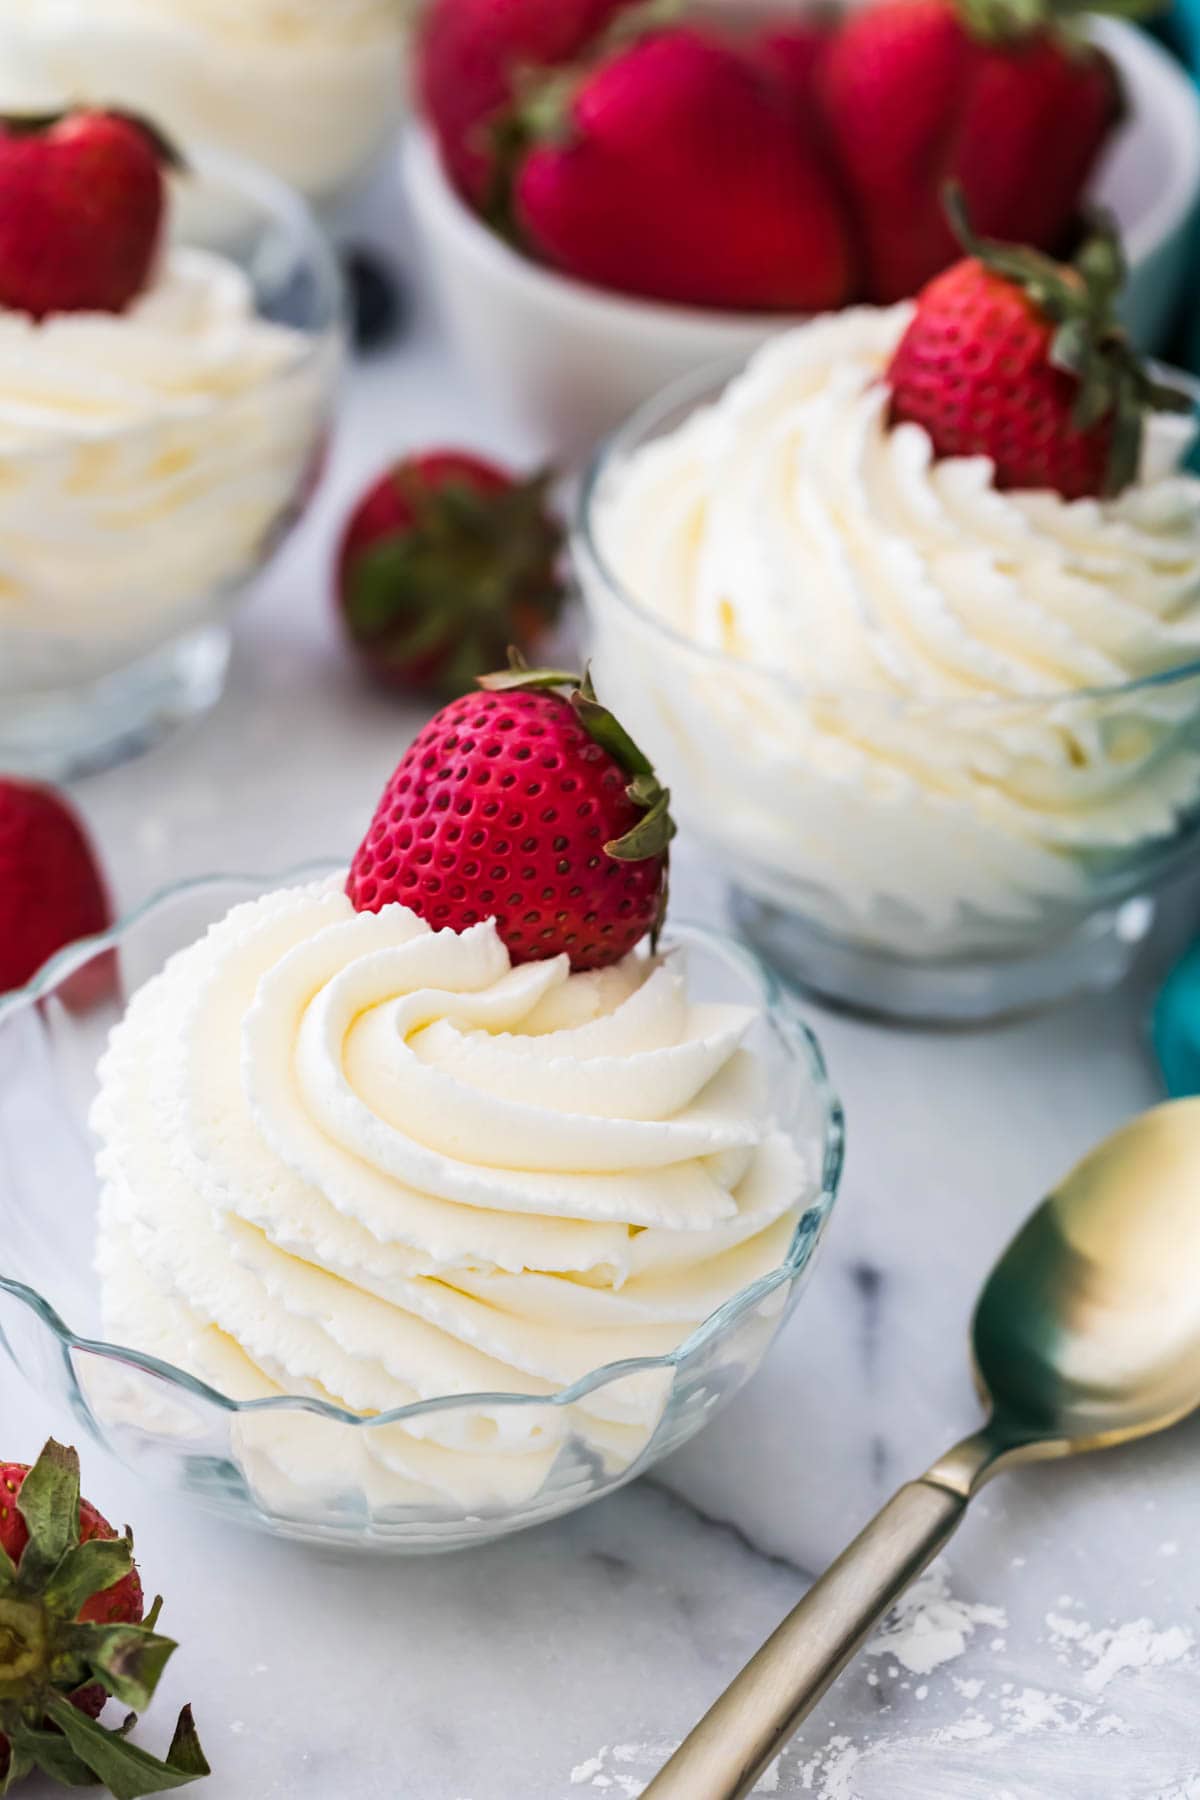 Two clear bowls with whipped cream inside and strawberries on top.